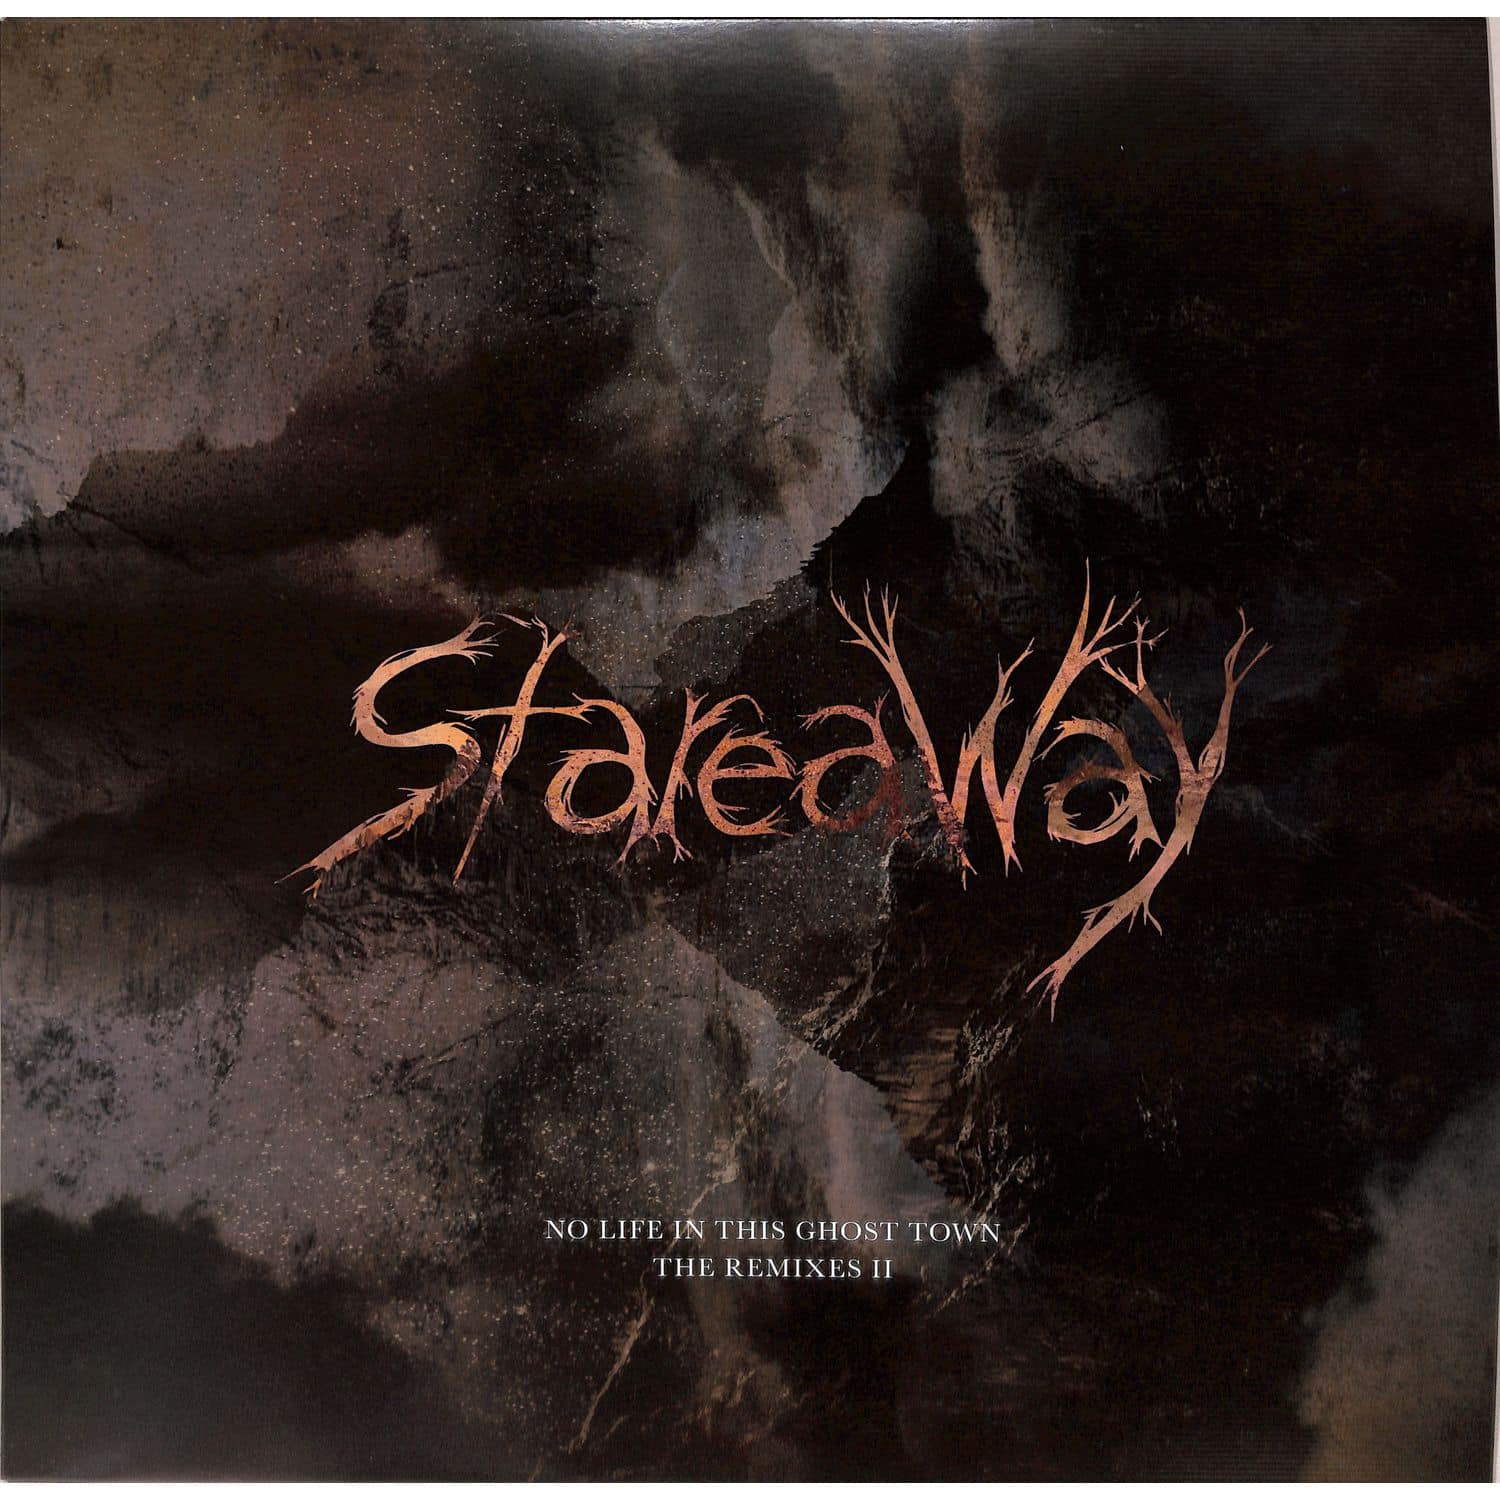 Stareaway - No Life In This Ghost Town - THE REMIXES II